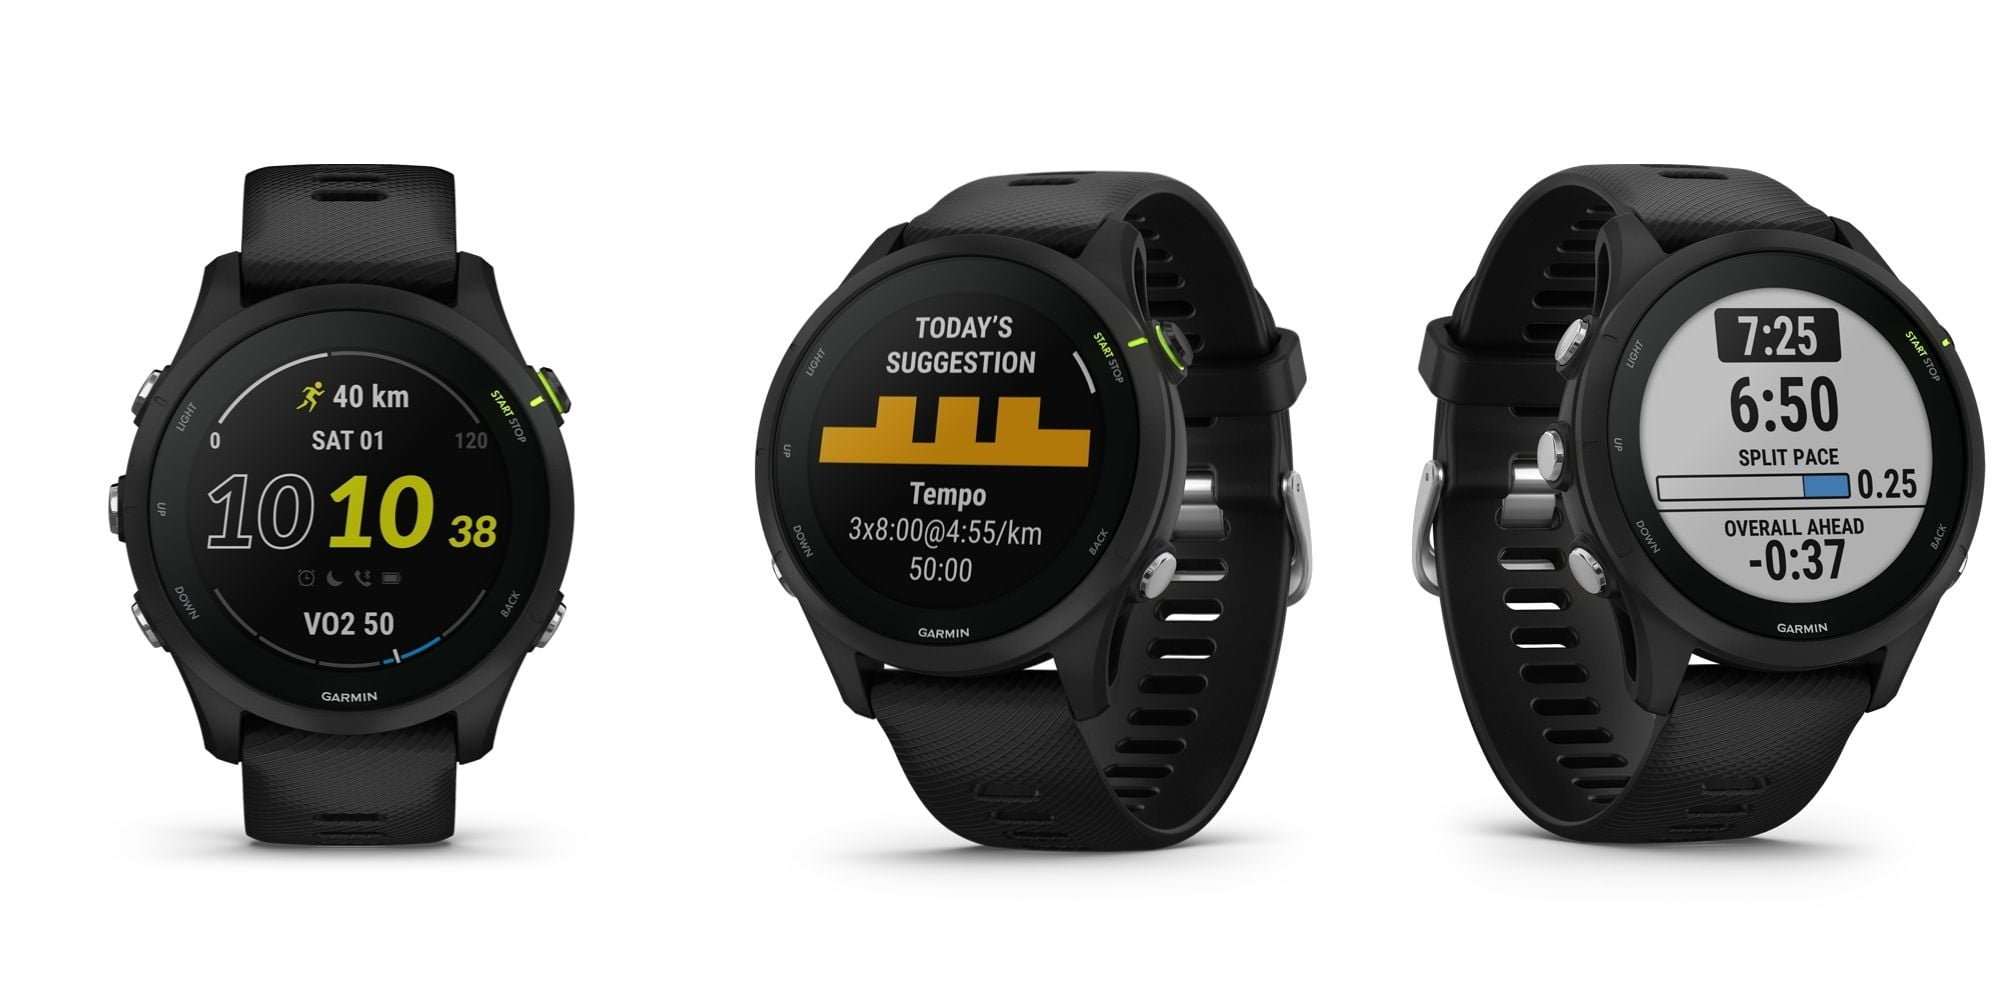 Garmin Forerunner 255 priced at £355 and new images confirming design via Danish retailer